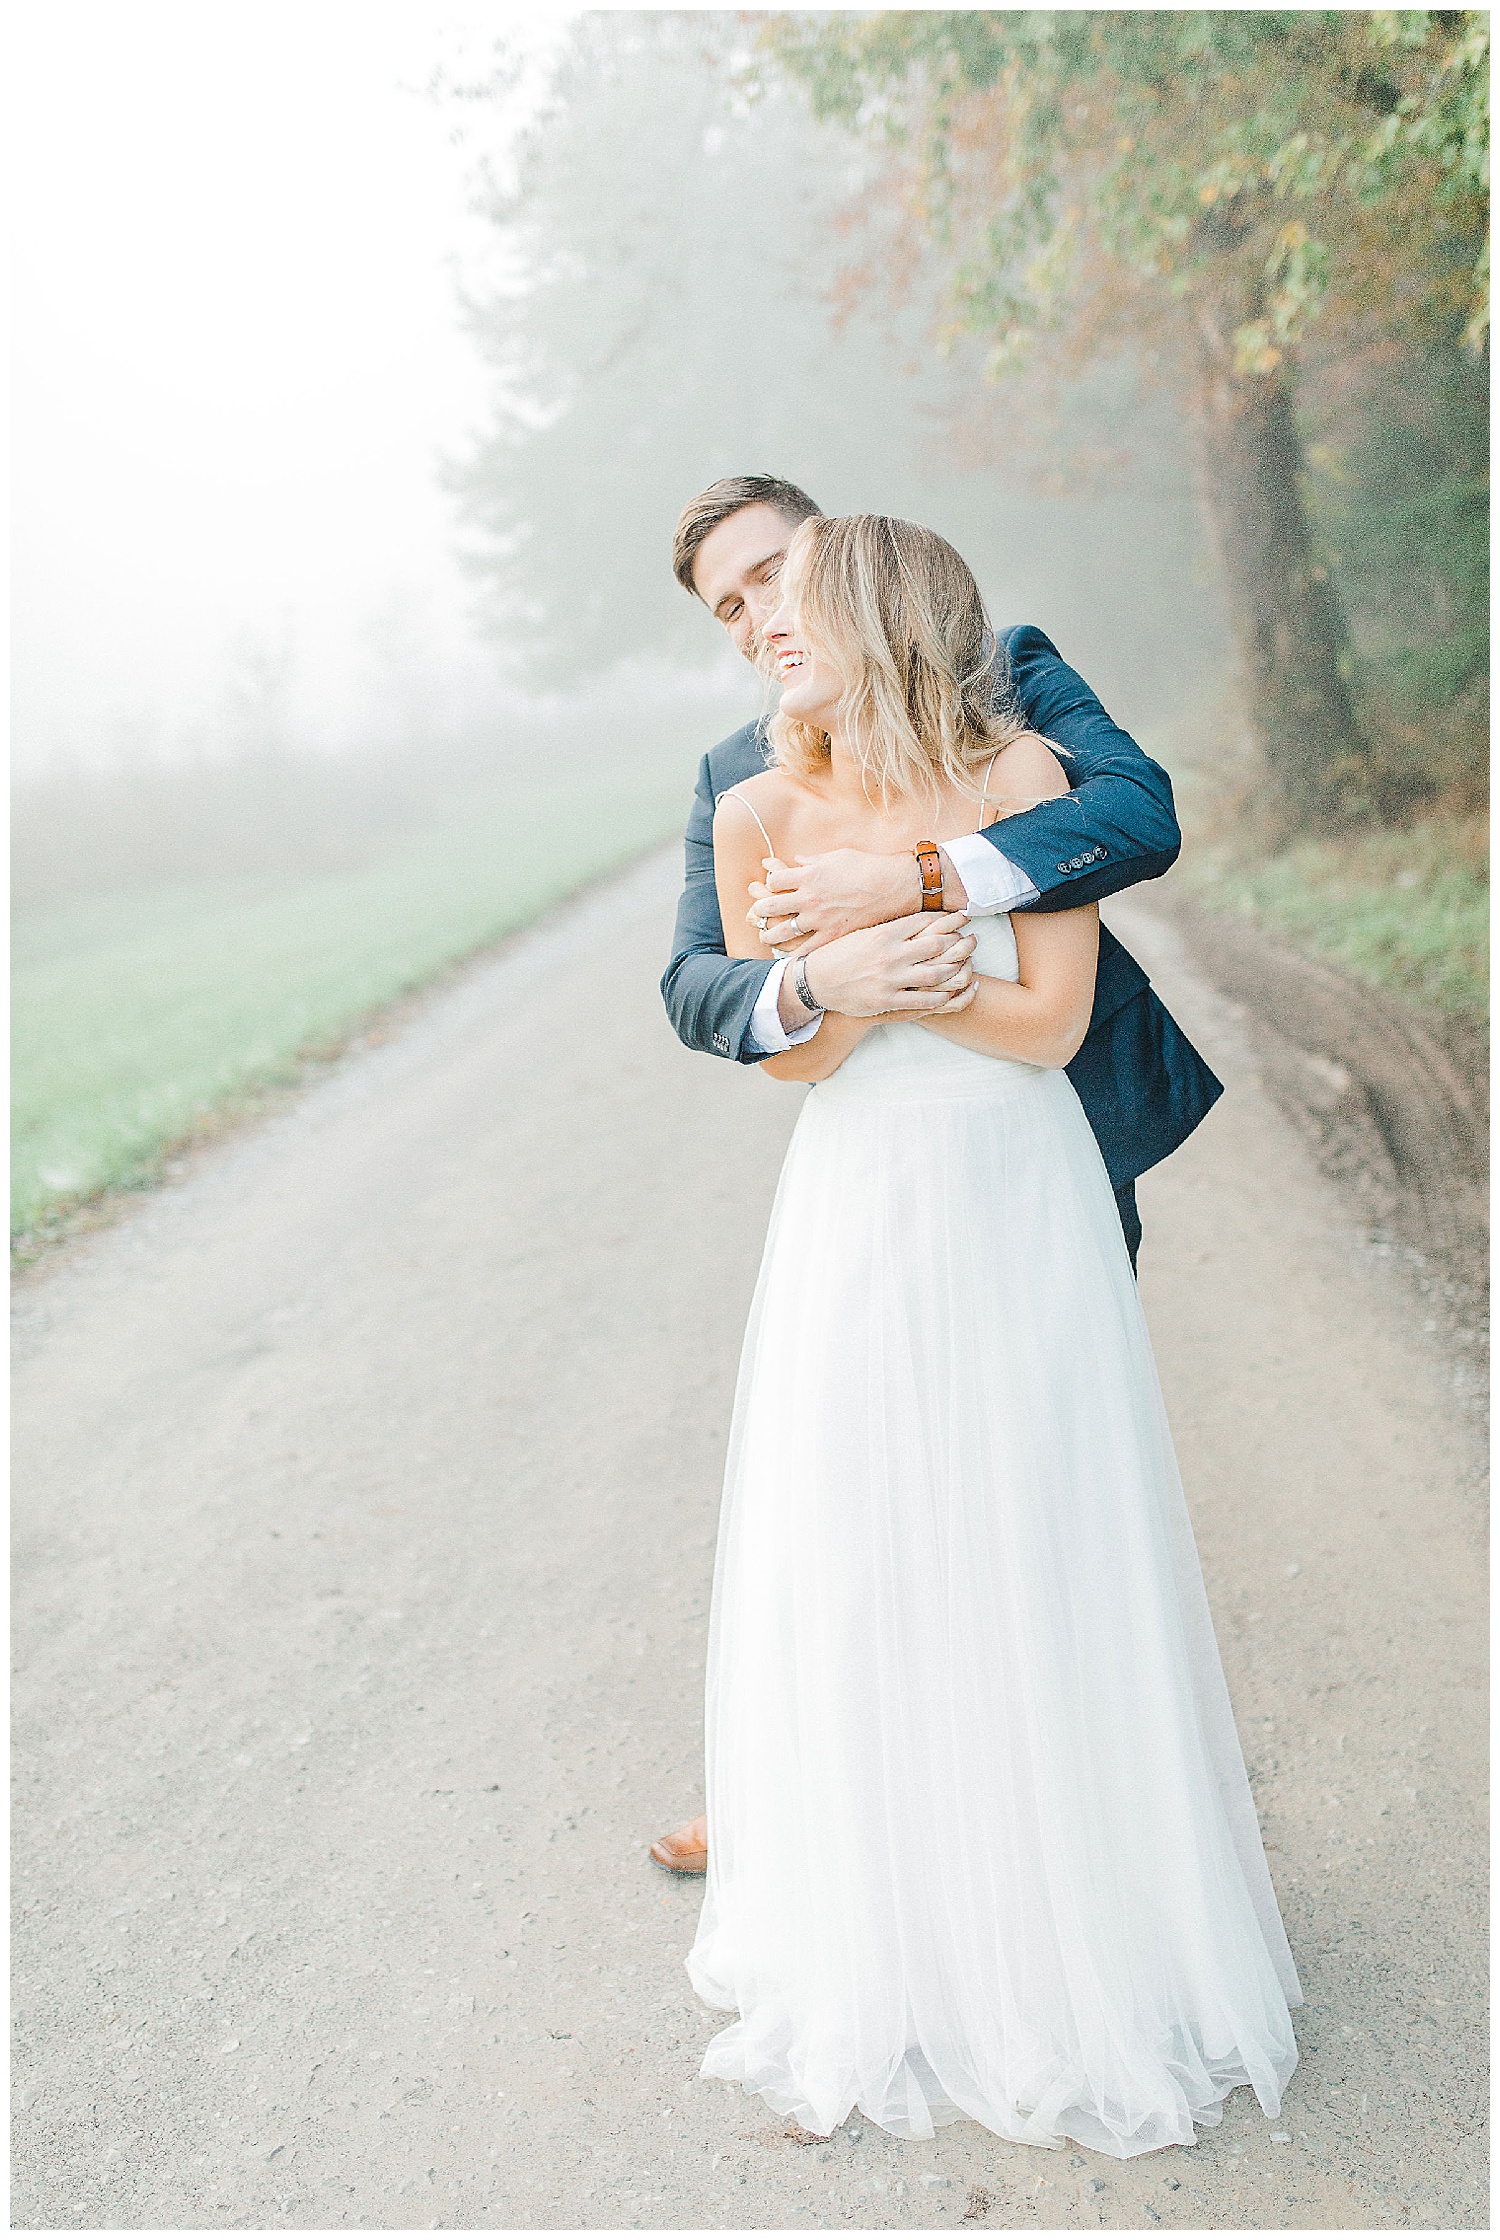 Emma Rose Company recently got to travel all the way to Nashville to photograph the most beautiful post-wedding bride and groom portraits in the Great Smoky Mountains with a gorgeous couple! Nashville wedding inspiration at it's finest._0017.jpg